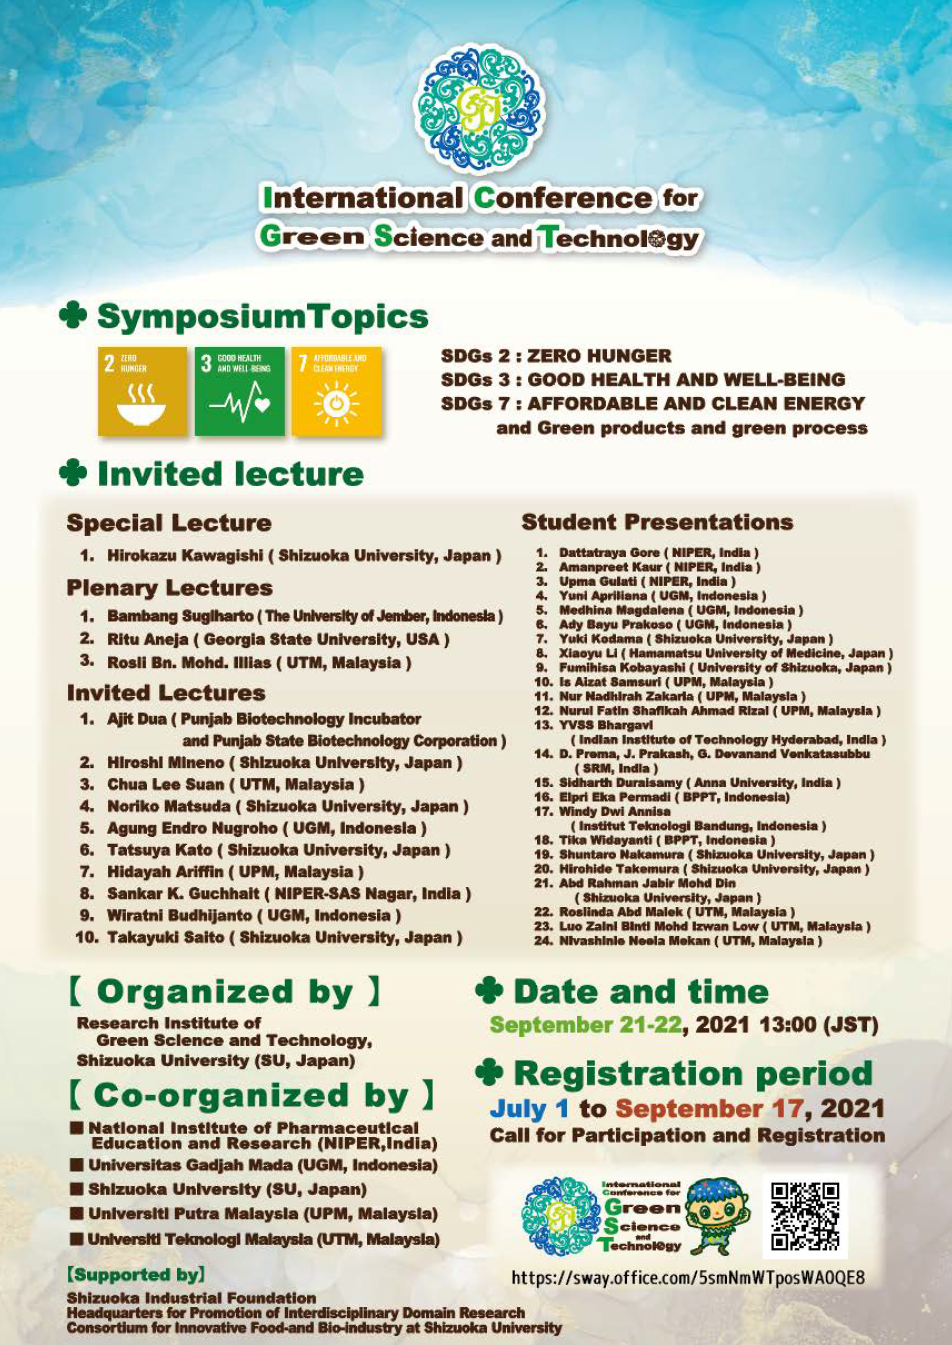 「International Conference on Green Science and Technology 2021 (ICGST2021)」開催のお知らせ